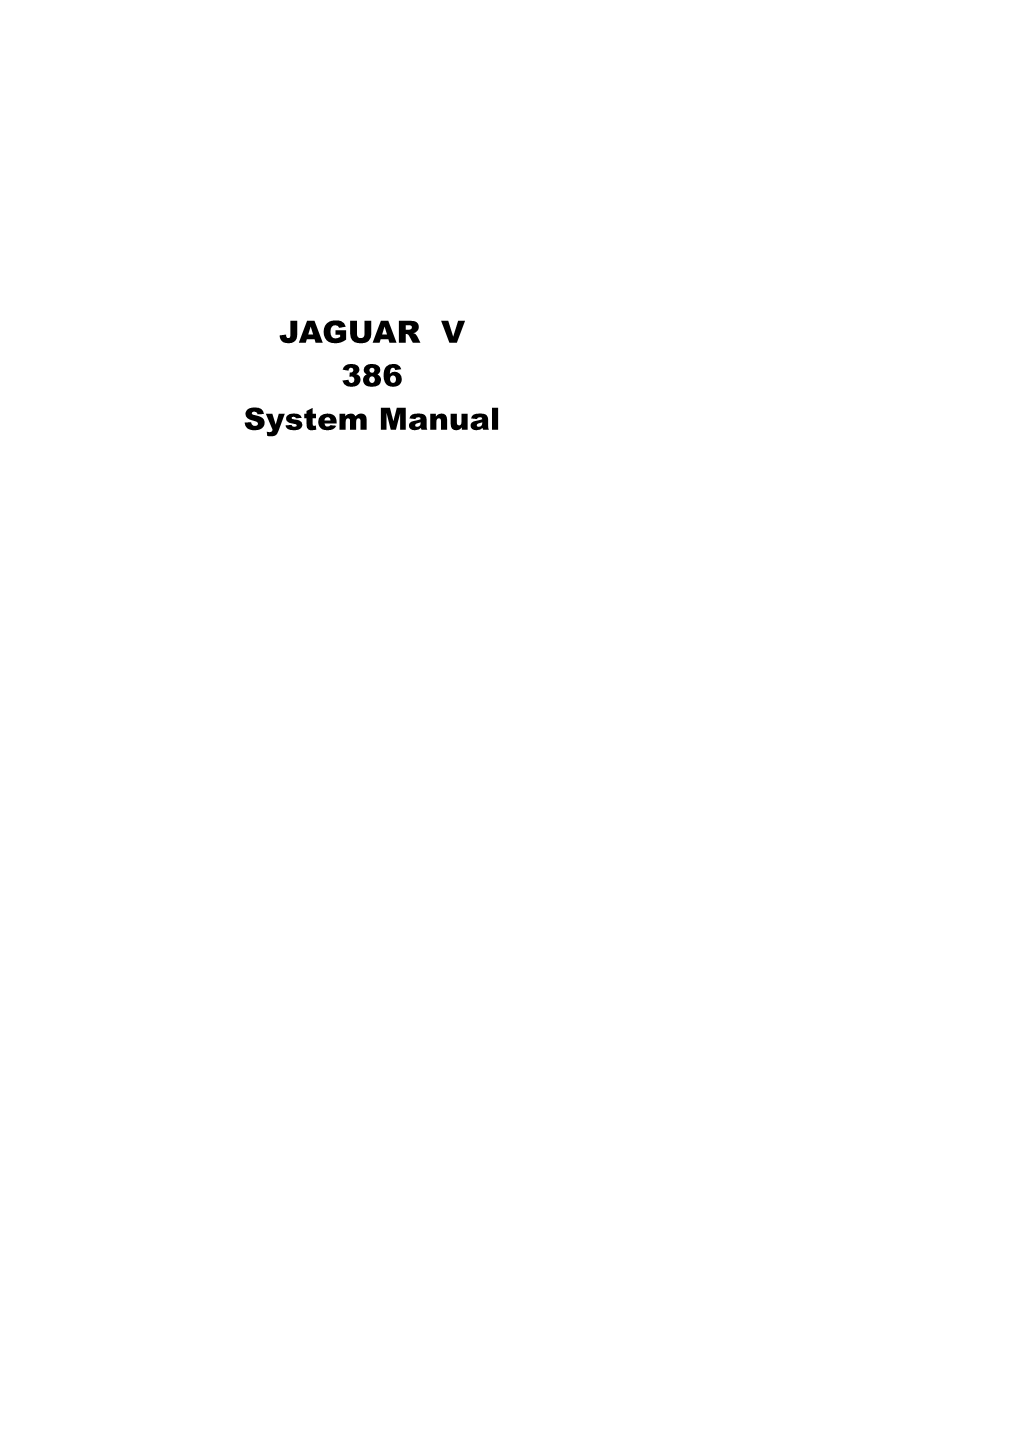 JAGUAR V 386 System Manual the Material in This Manual Is for Information Only and Is Subject to Change Without Notice